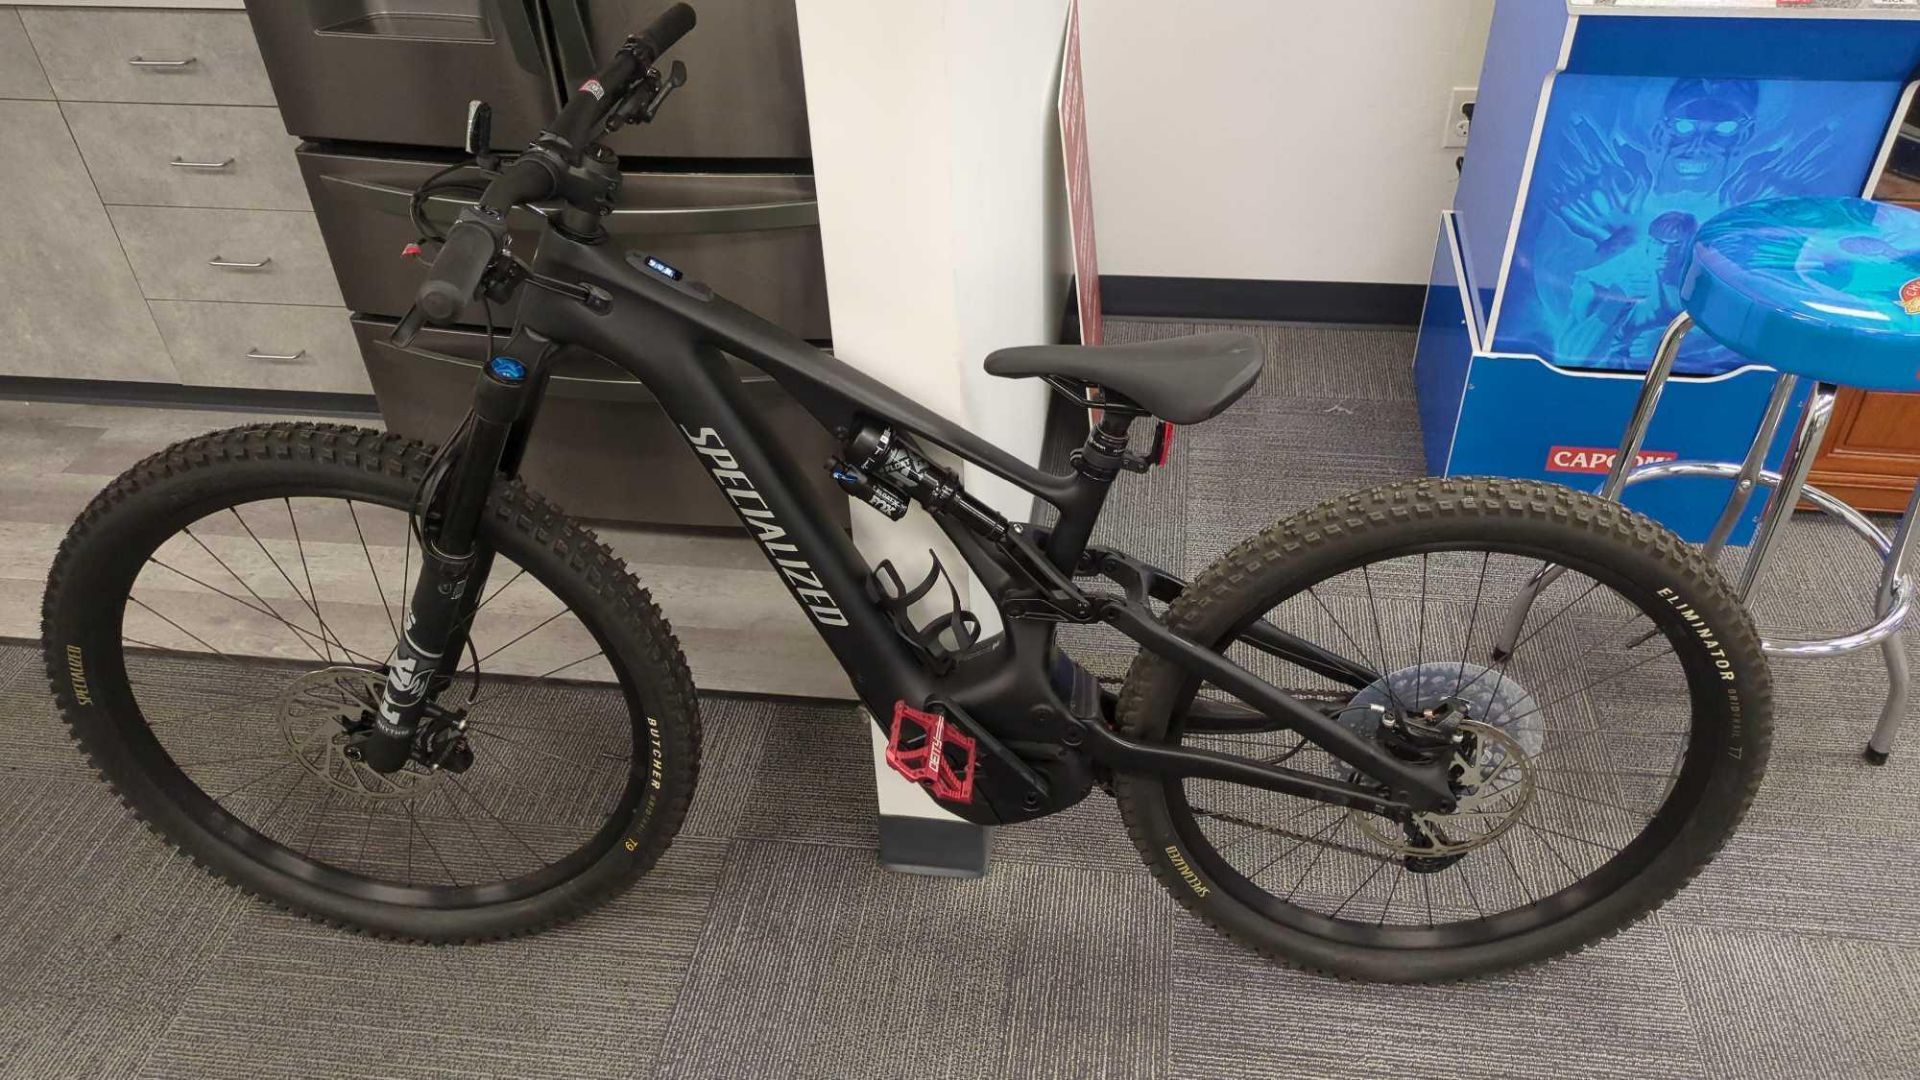 specialized ebike - Image 17 of 24